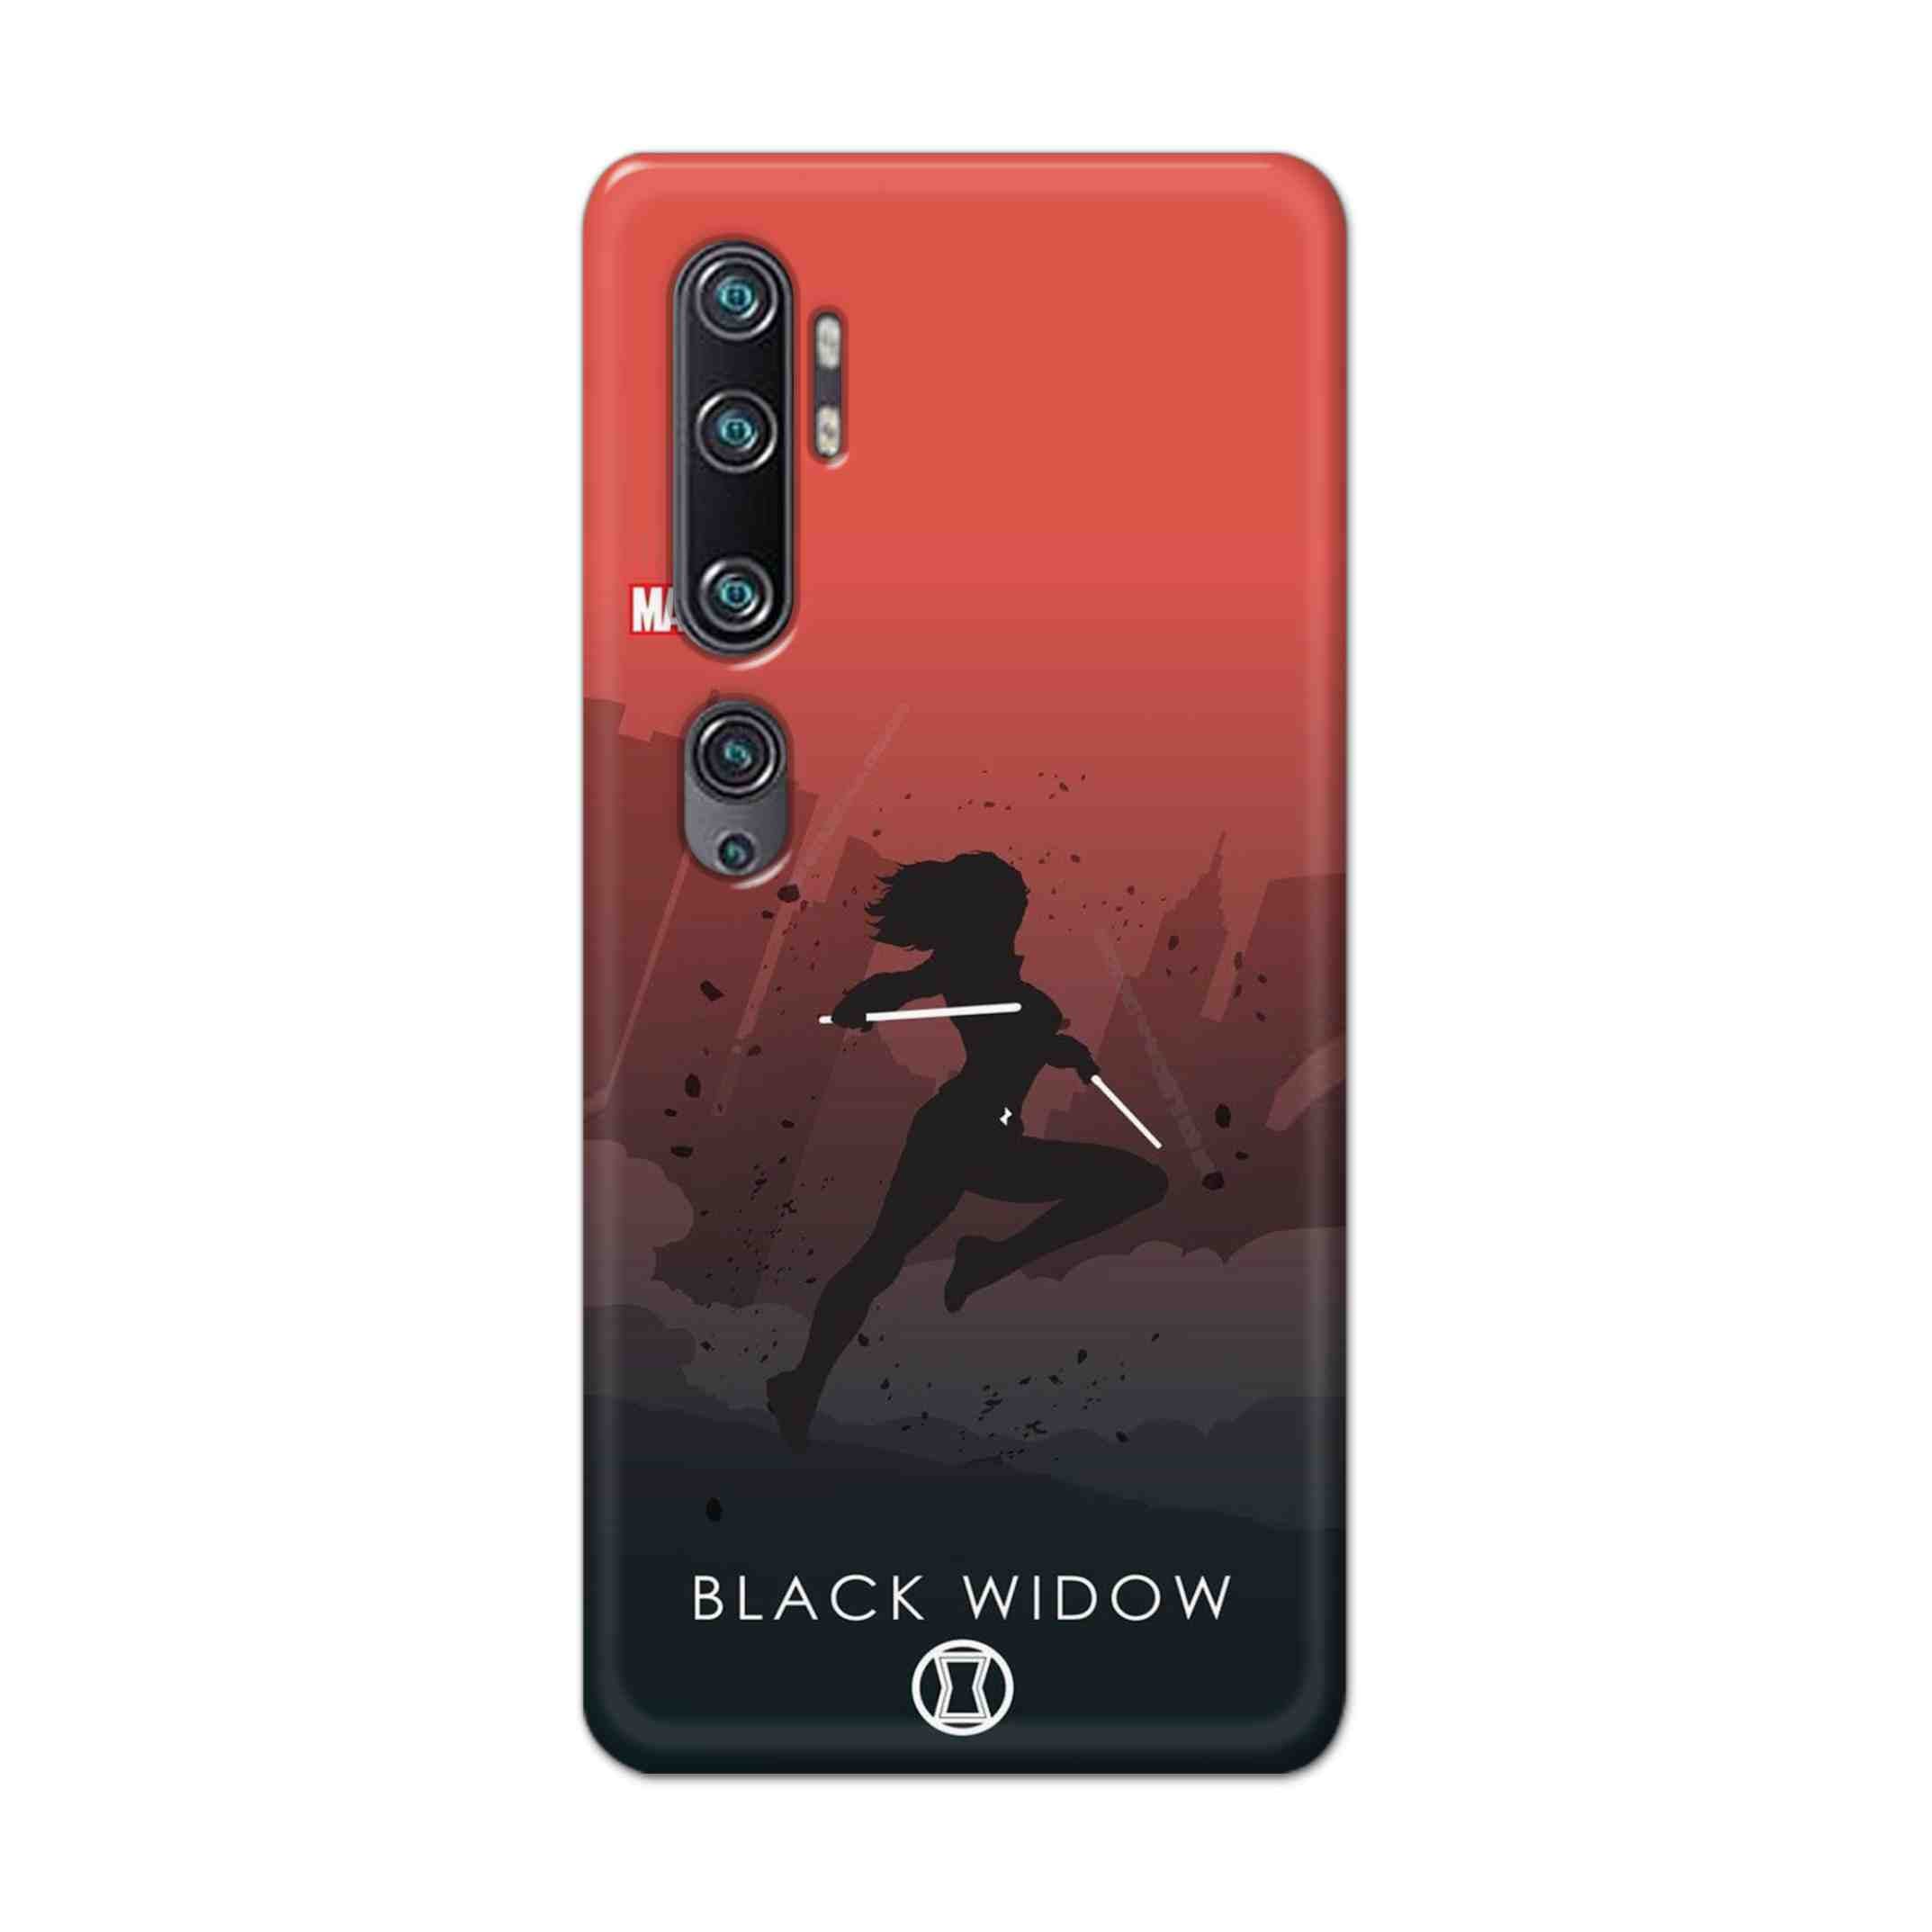 Buy Black Widow Hard Back Mobile Phone Case Cover For Xiaomi Mi Note 10 Online